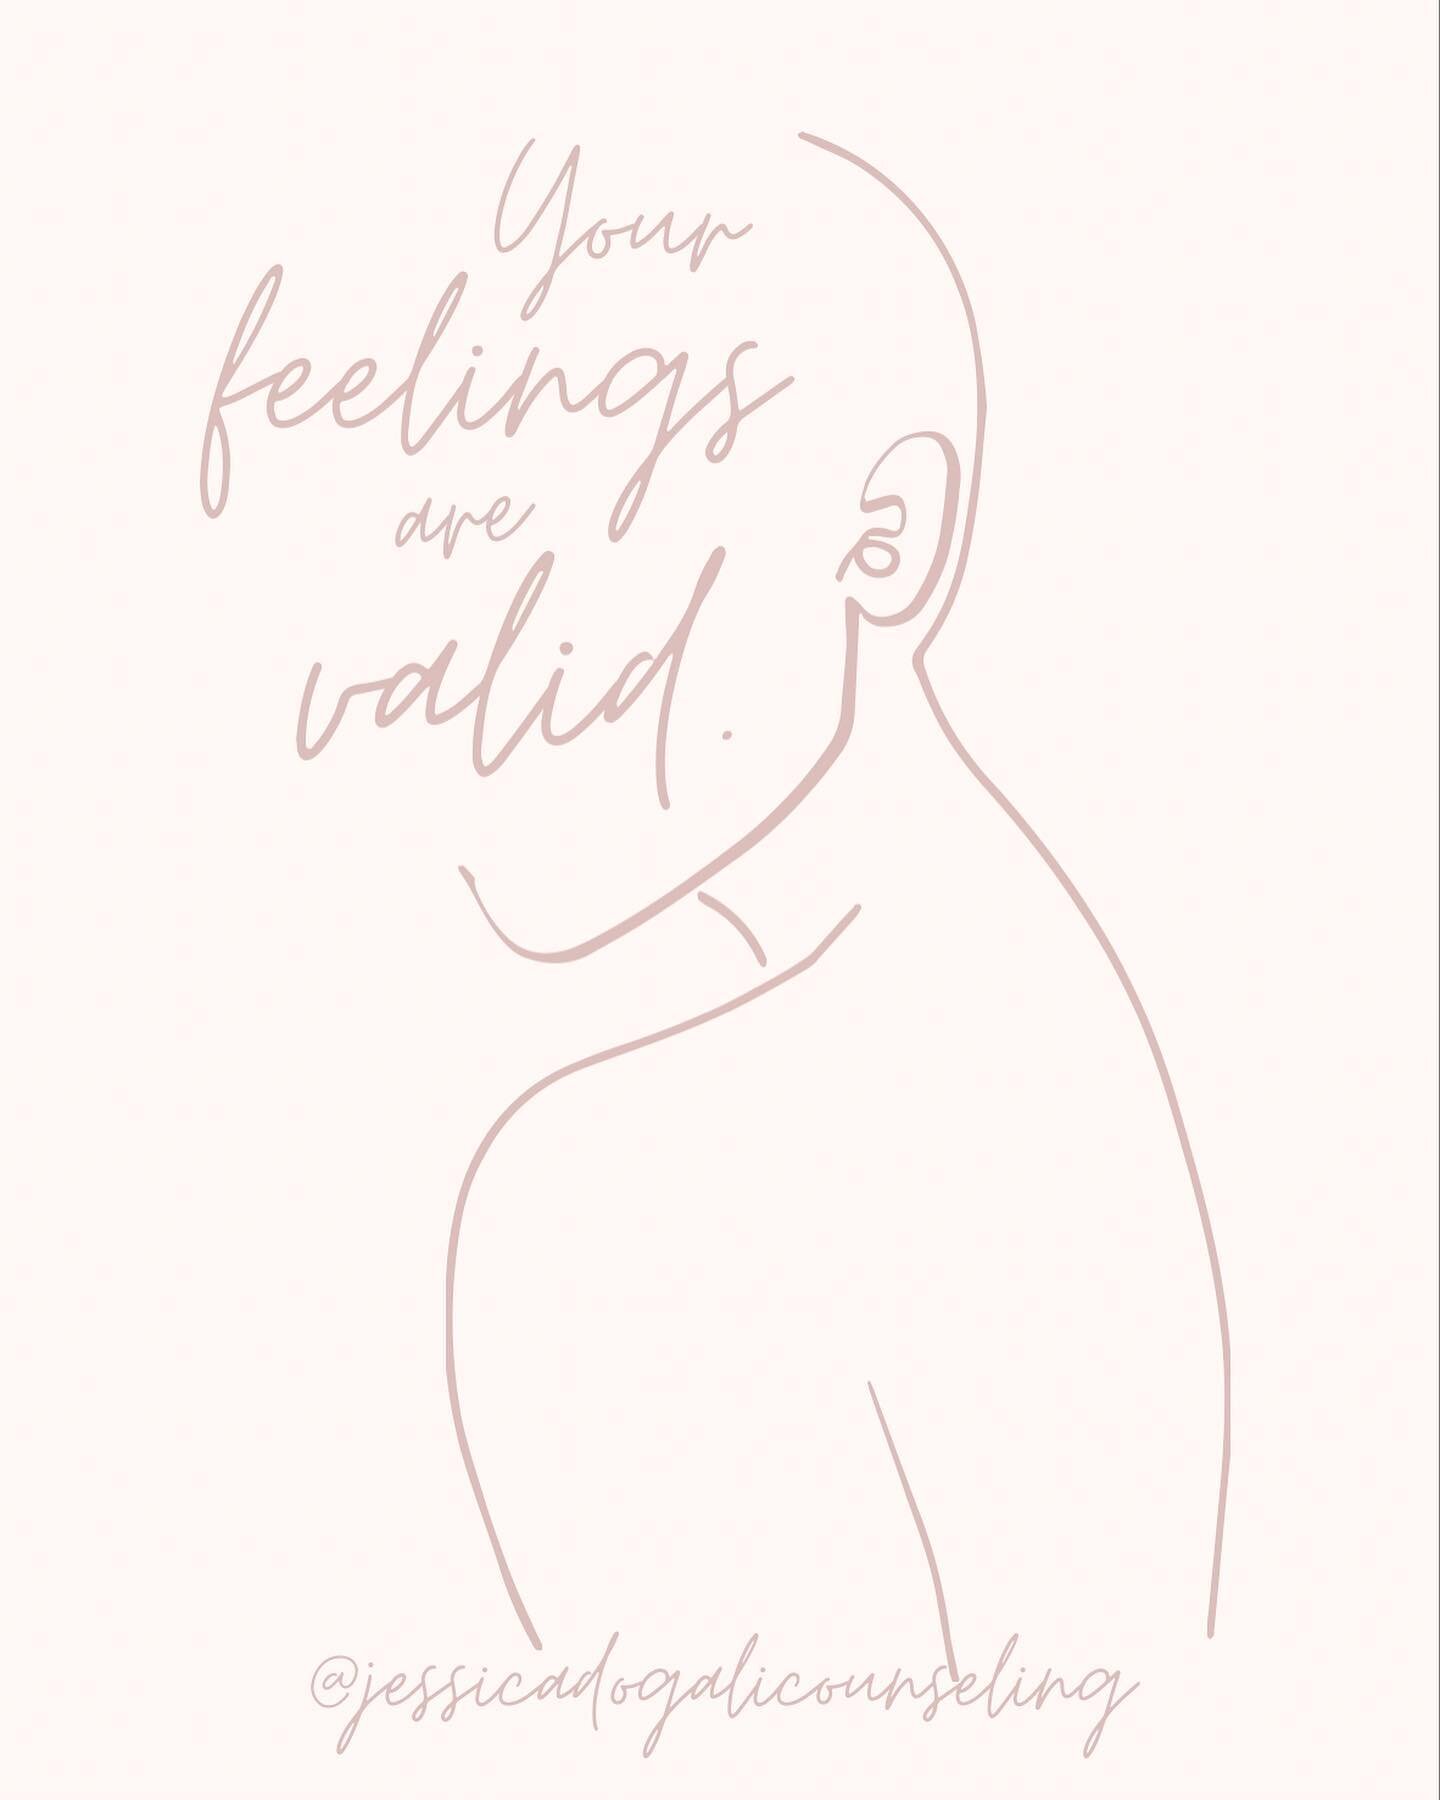 Feelings - it&rsquo;s what most commonly brings someone to therapy✨

&bull; Sadness that they don&rsquo;t understand why it started
&bull; Anxiety they want to get rid of
&bull; Disappointment they can&rsquo;t tolerate
&bull; Depression they don&rsqu